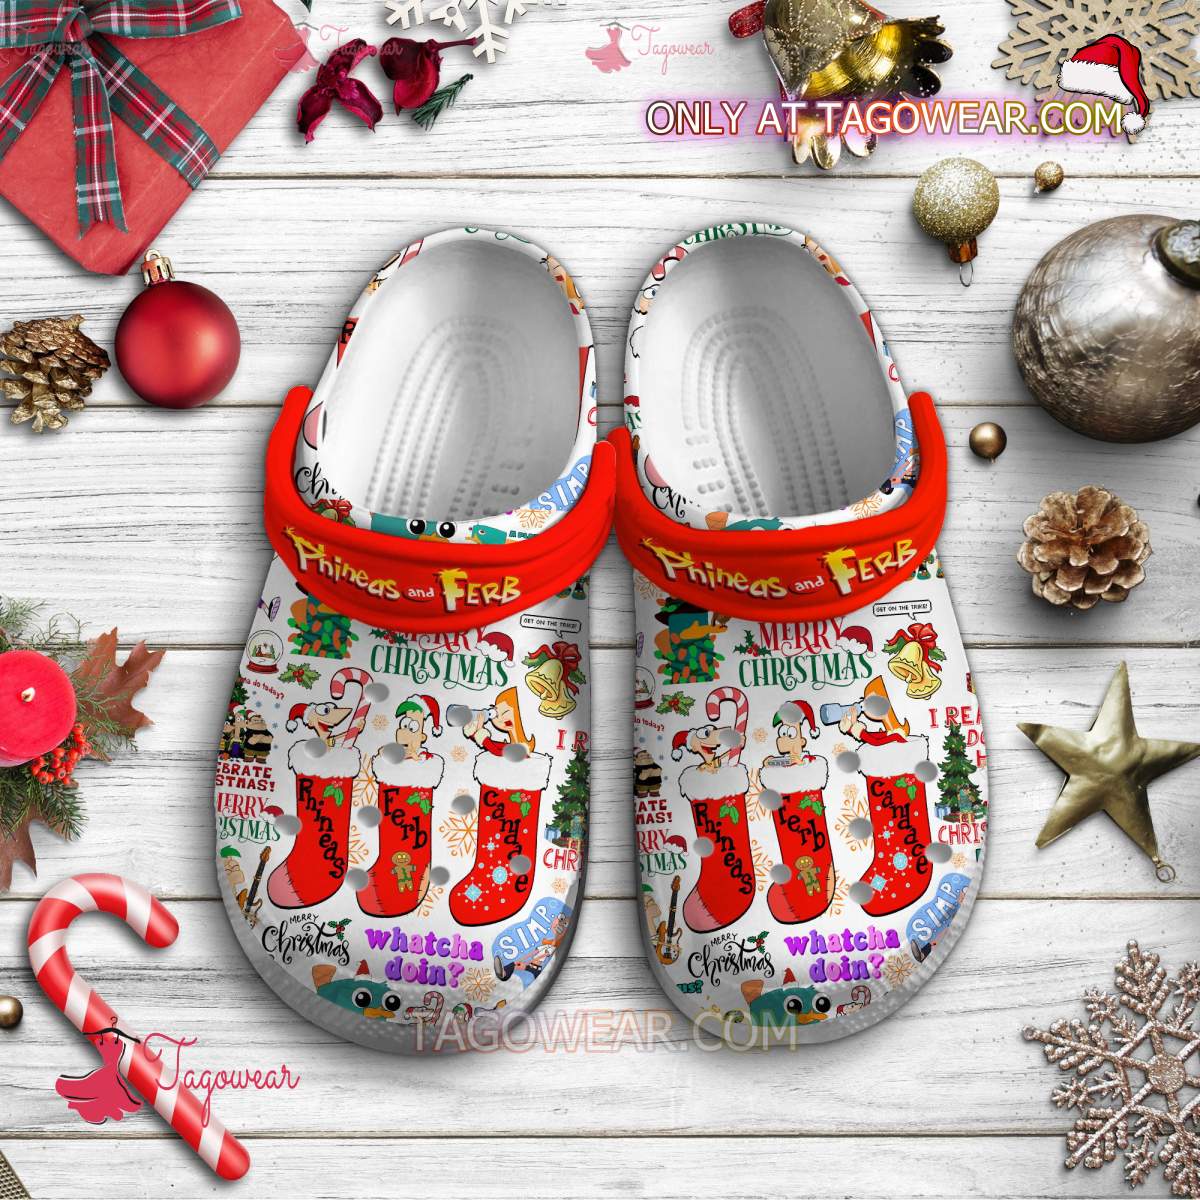 Phineas And Ferb Merry Christmas Crocs - Tagowear